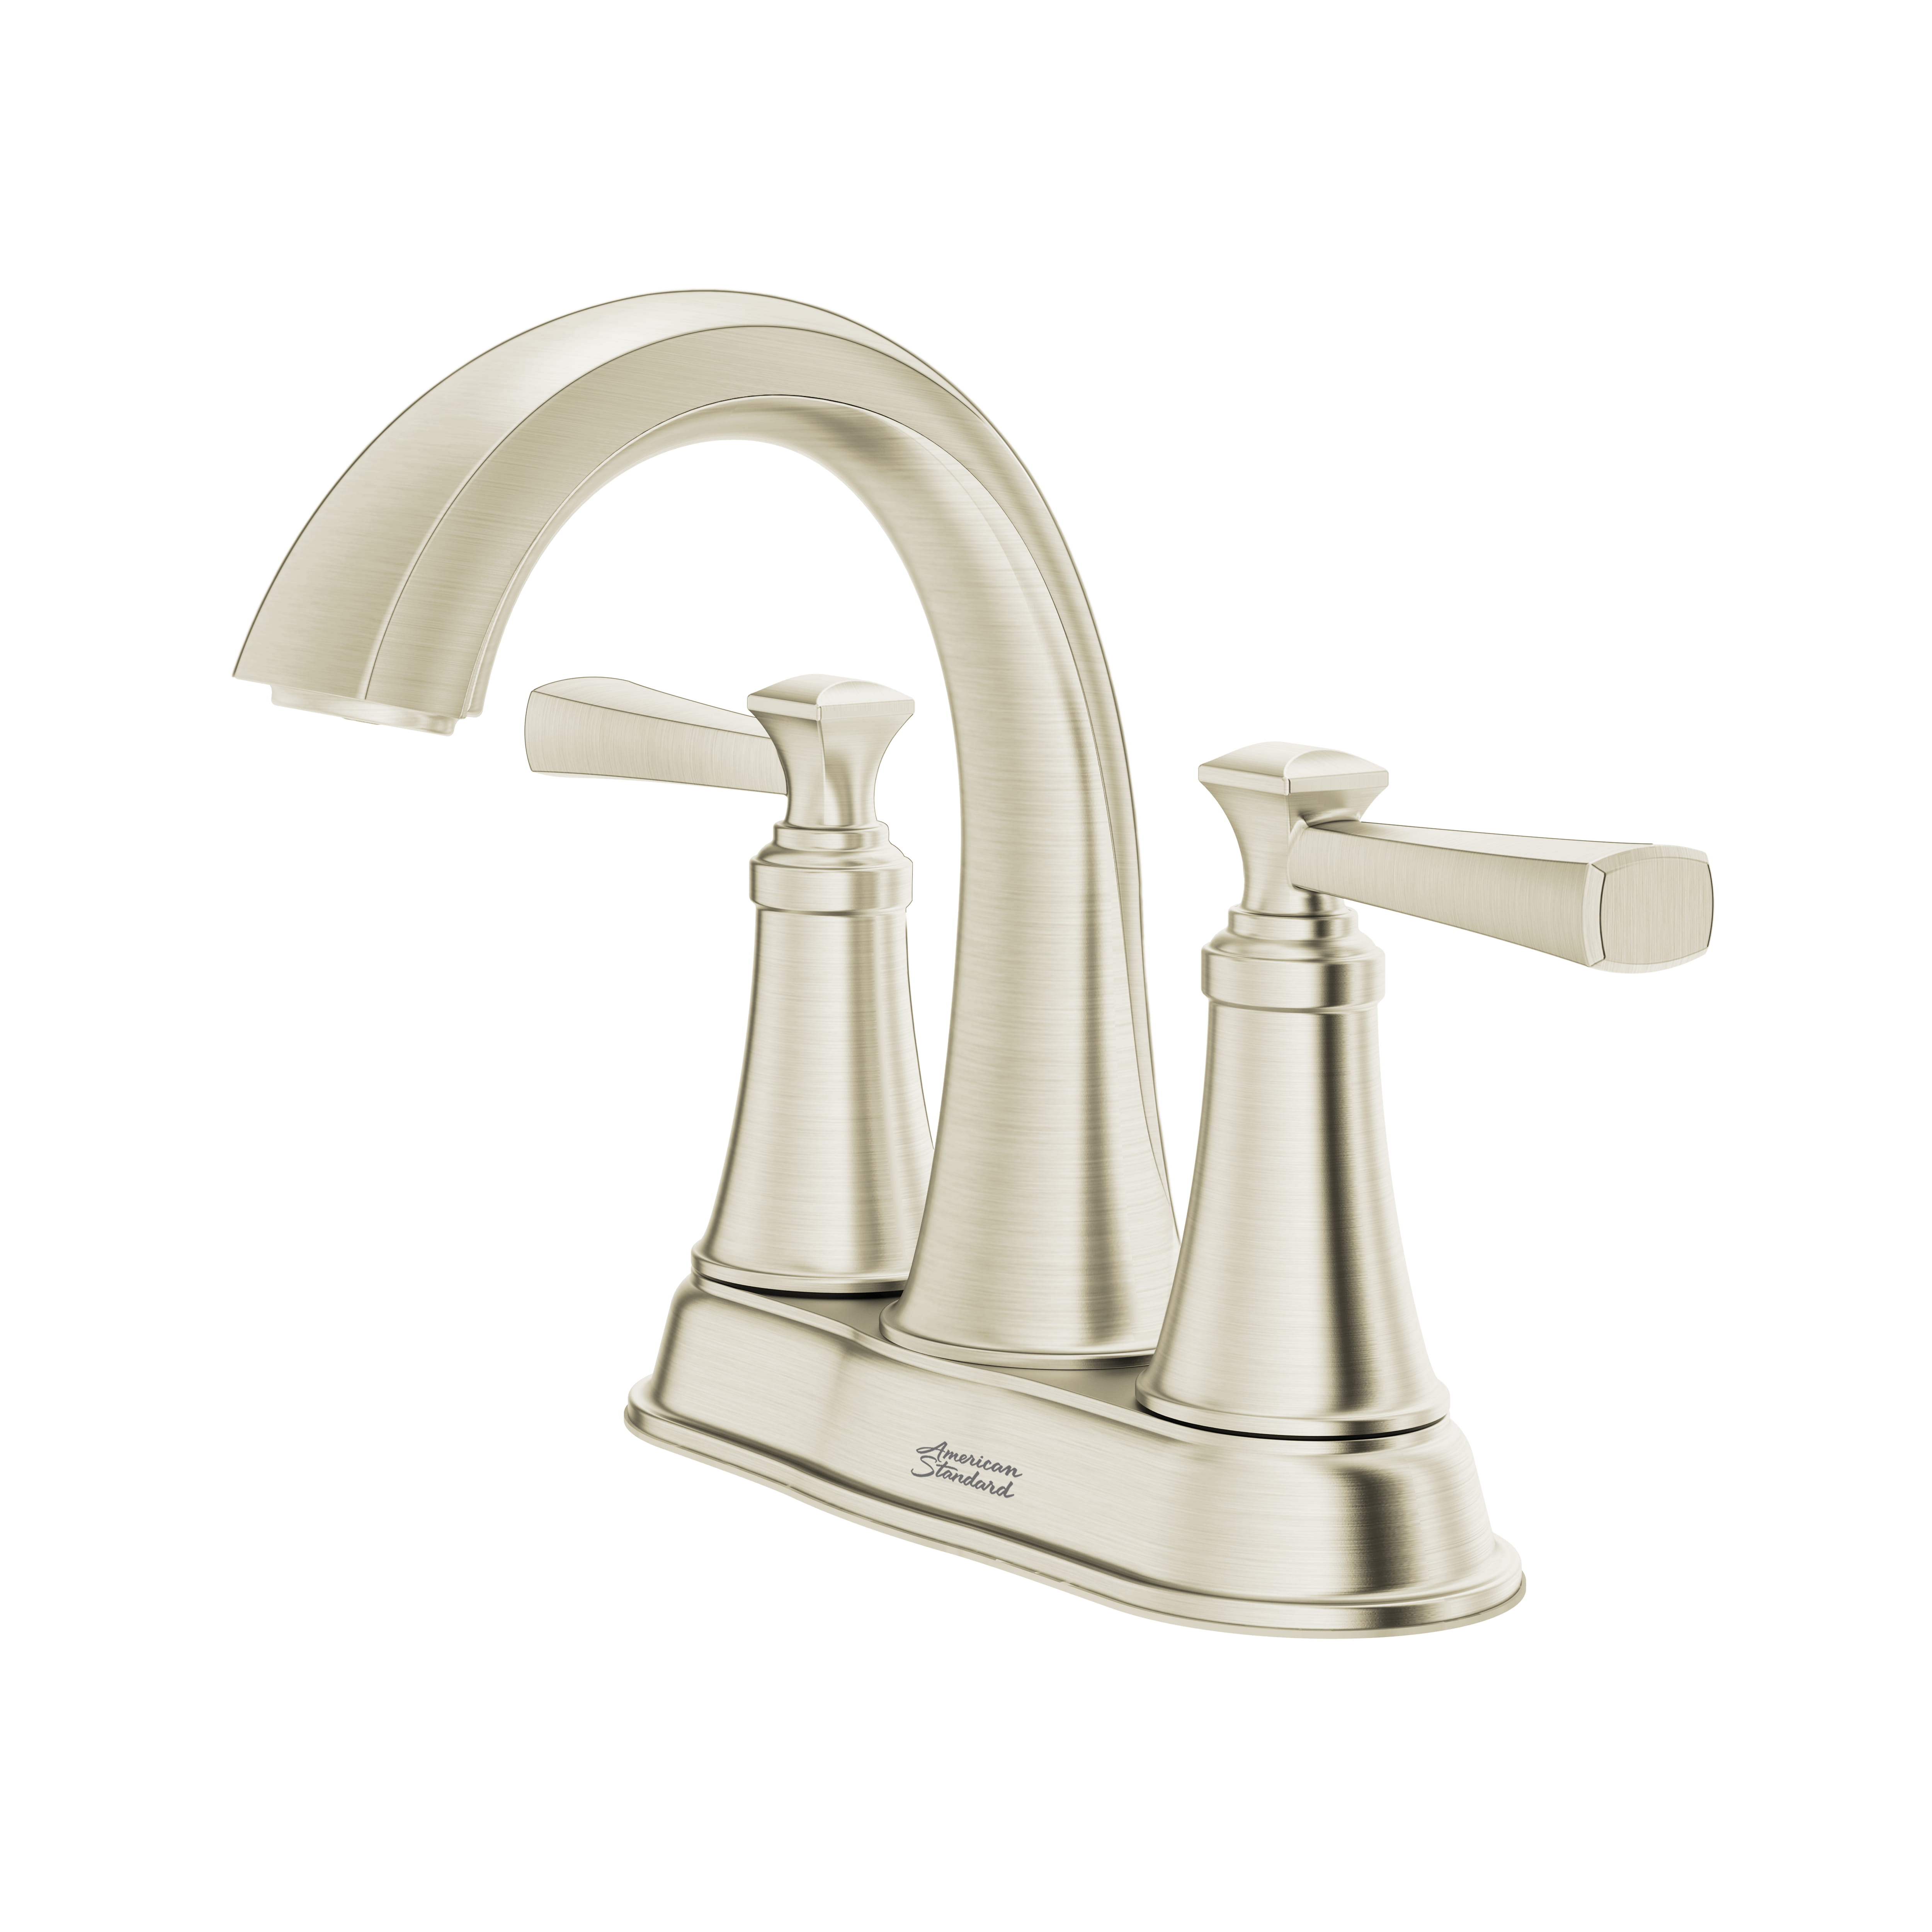 Rumson 4 In Centerset 2 Handle Bathroom Faucet 12 GPM with Lever Handles BRUSHED NICKEL